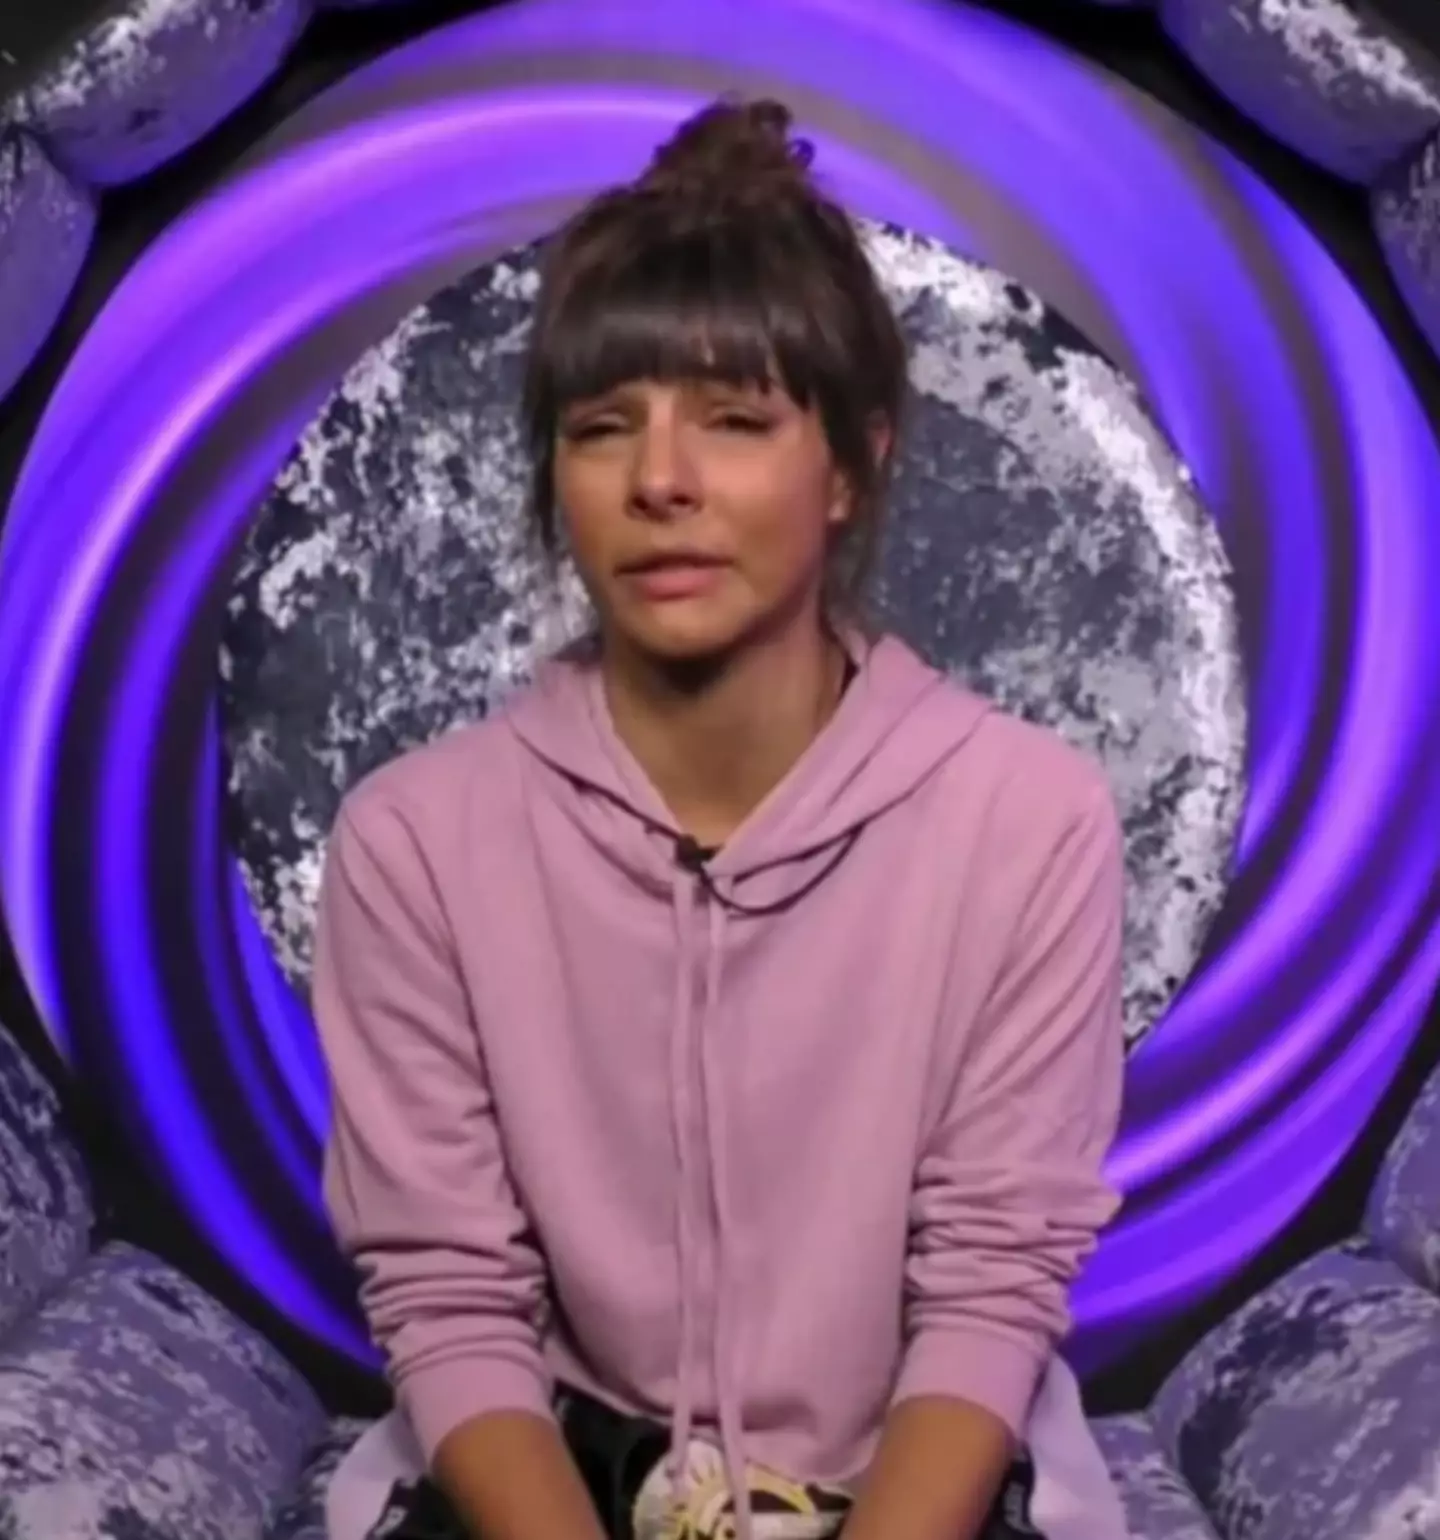 Roxanne Pallett accused Ryan of assaulting her while they were both housemates on Celebrity Big Brother.